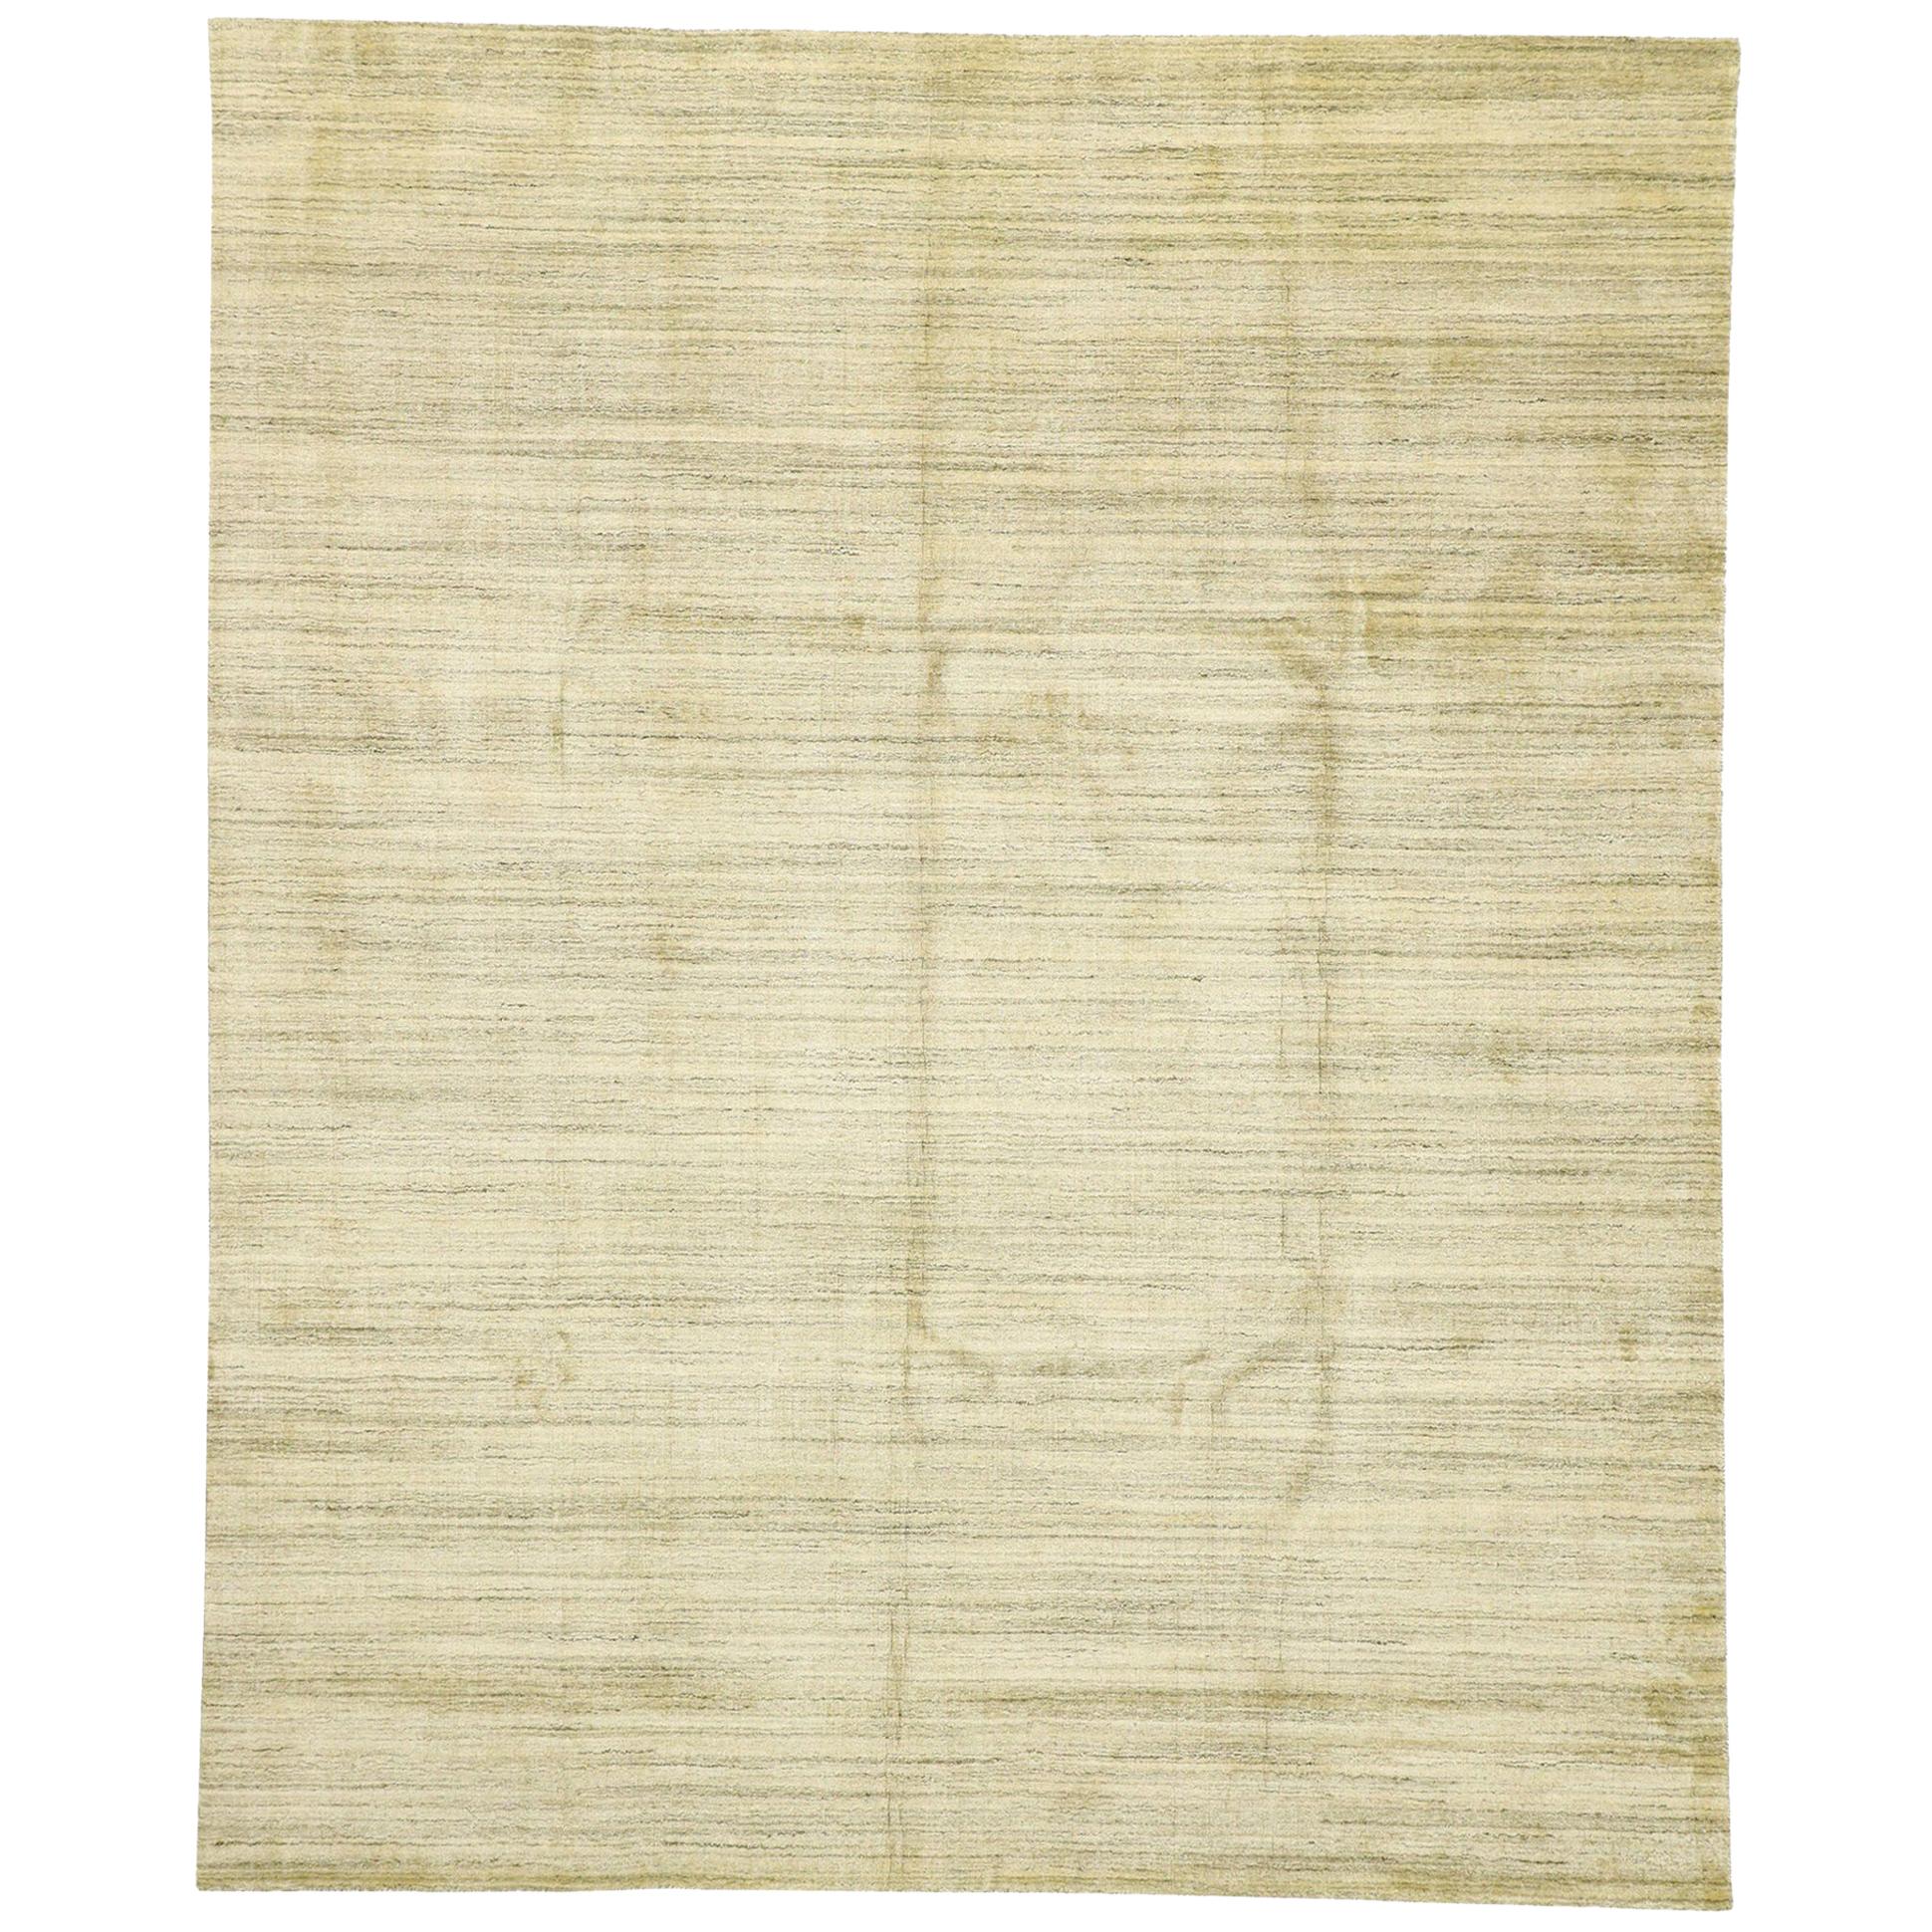 New Transitional Area Rug with Cozy, Hygge Vibes and Warm Amish-Shaker Style For Sale